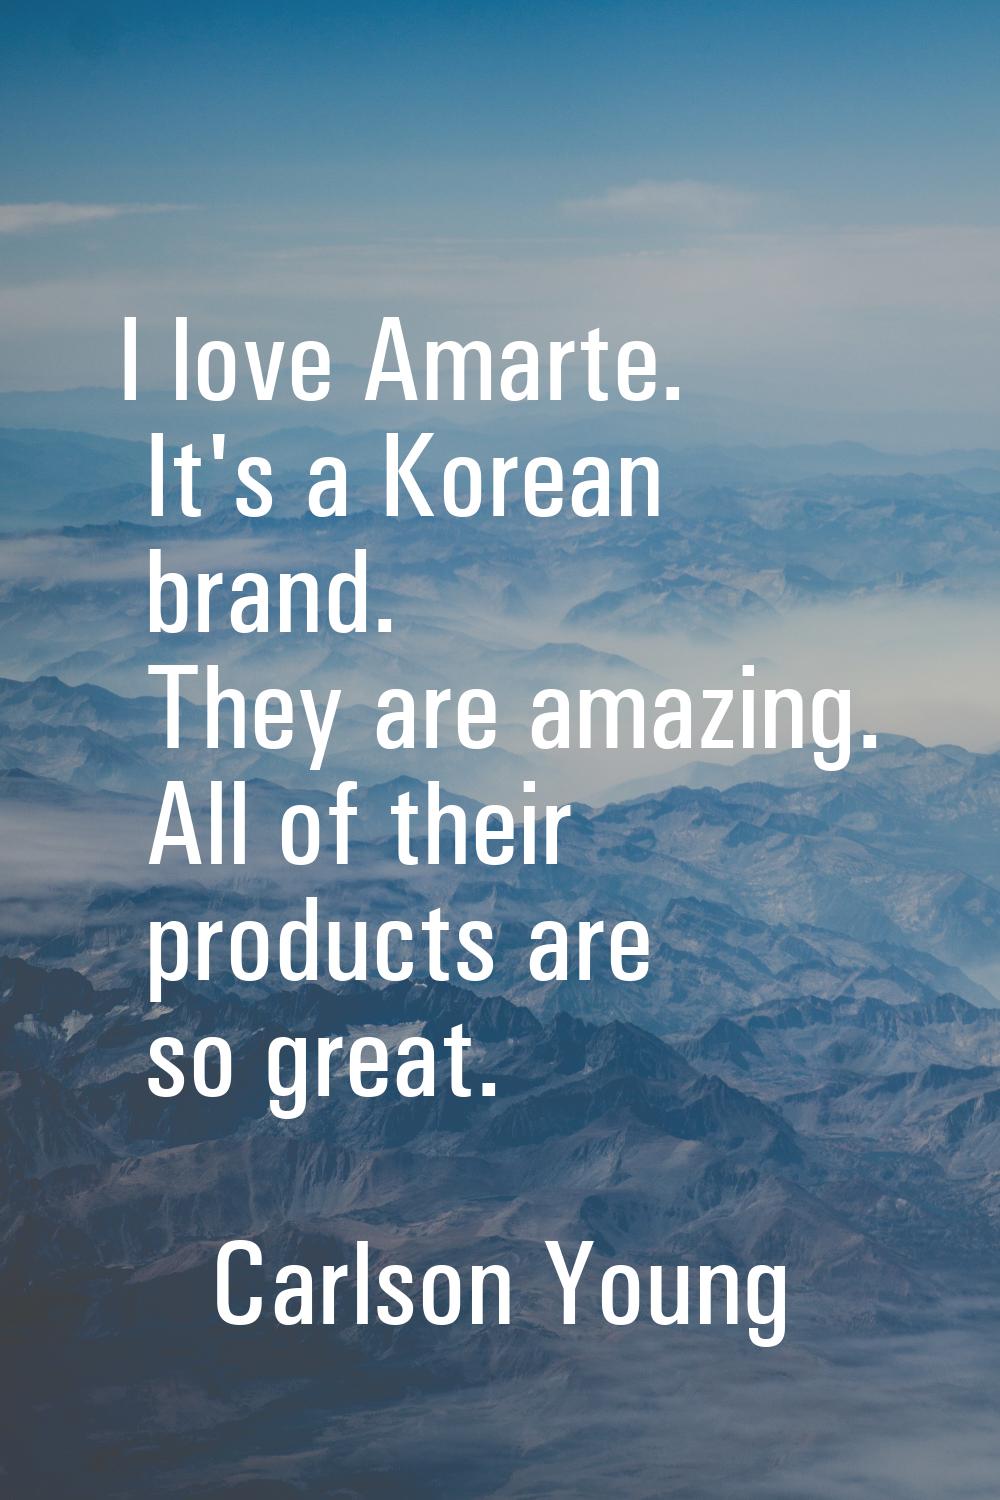 I love Amarte. It's a Korean brand. They are amazing. All of their products are so great.